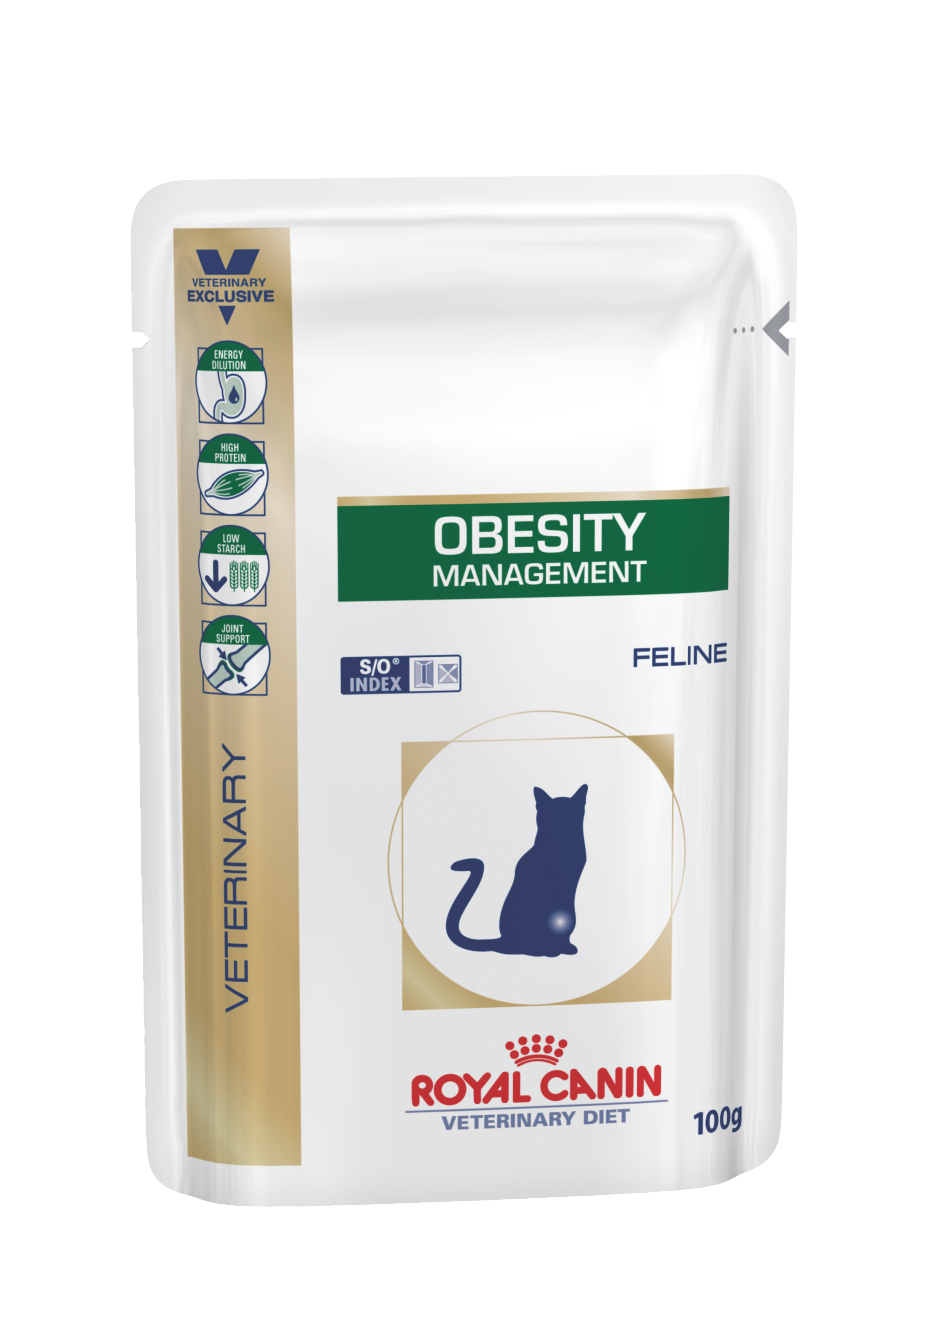 royal canin high dilution cat food